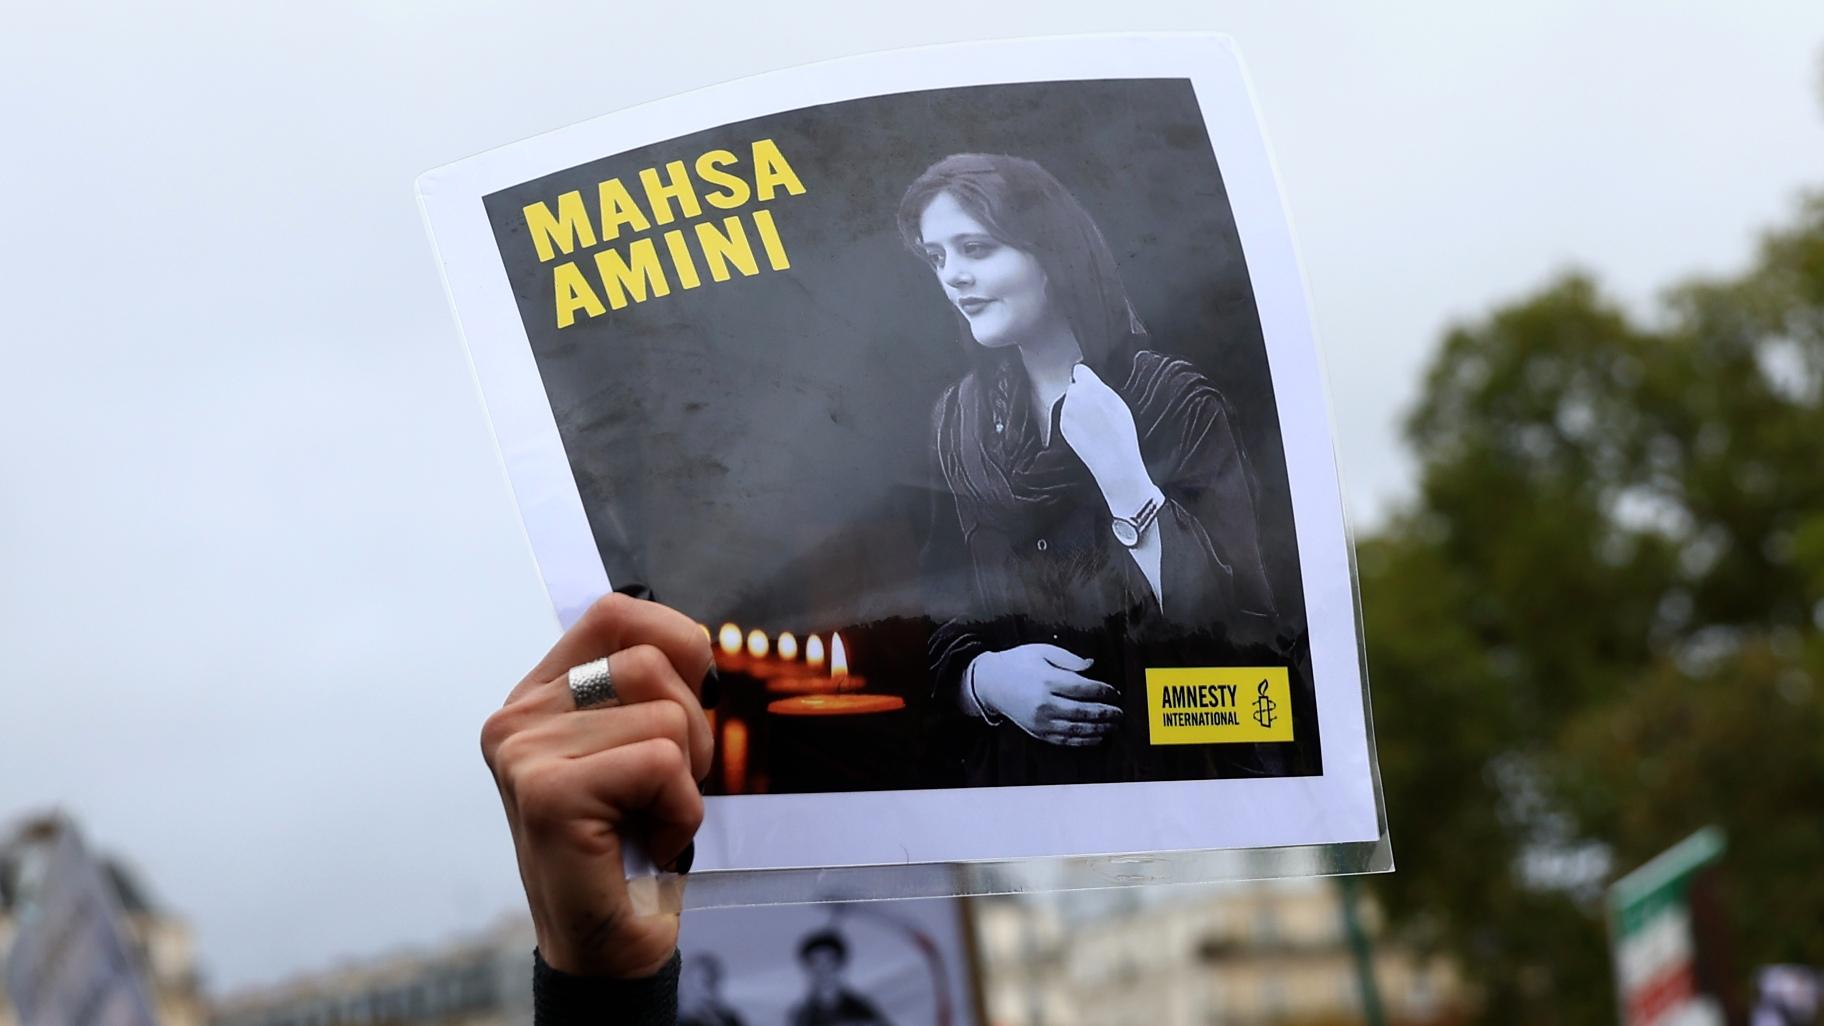 A protester shows a portrait of Mahsa Amini during a demonstration to support Iranian protesters standing up to their leadership over the death of a young woman in police custody, Sunday, Oct. 2, 2022 in Paris. (AP Photo / Aurelien Morissard)